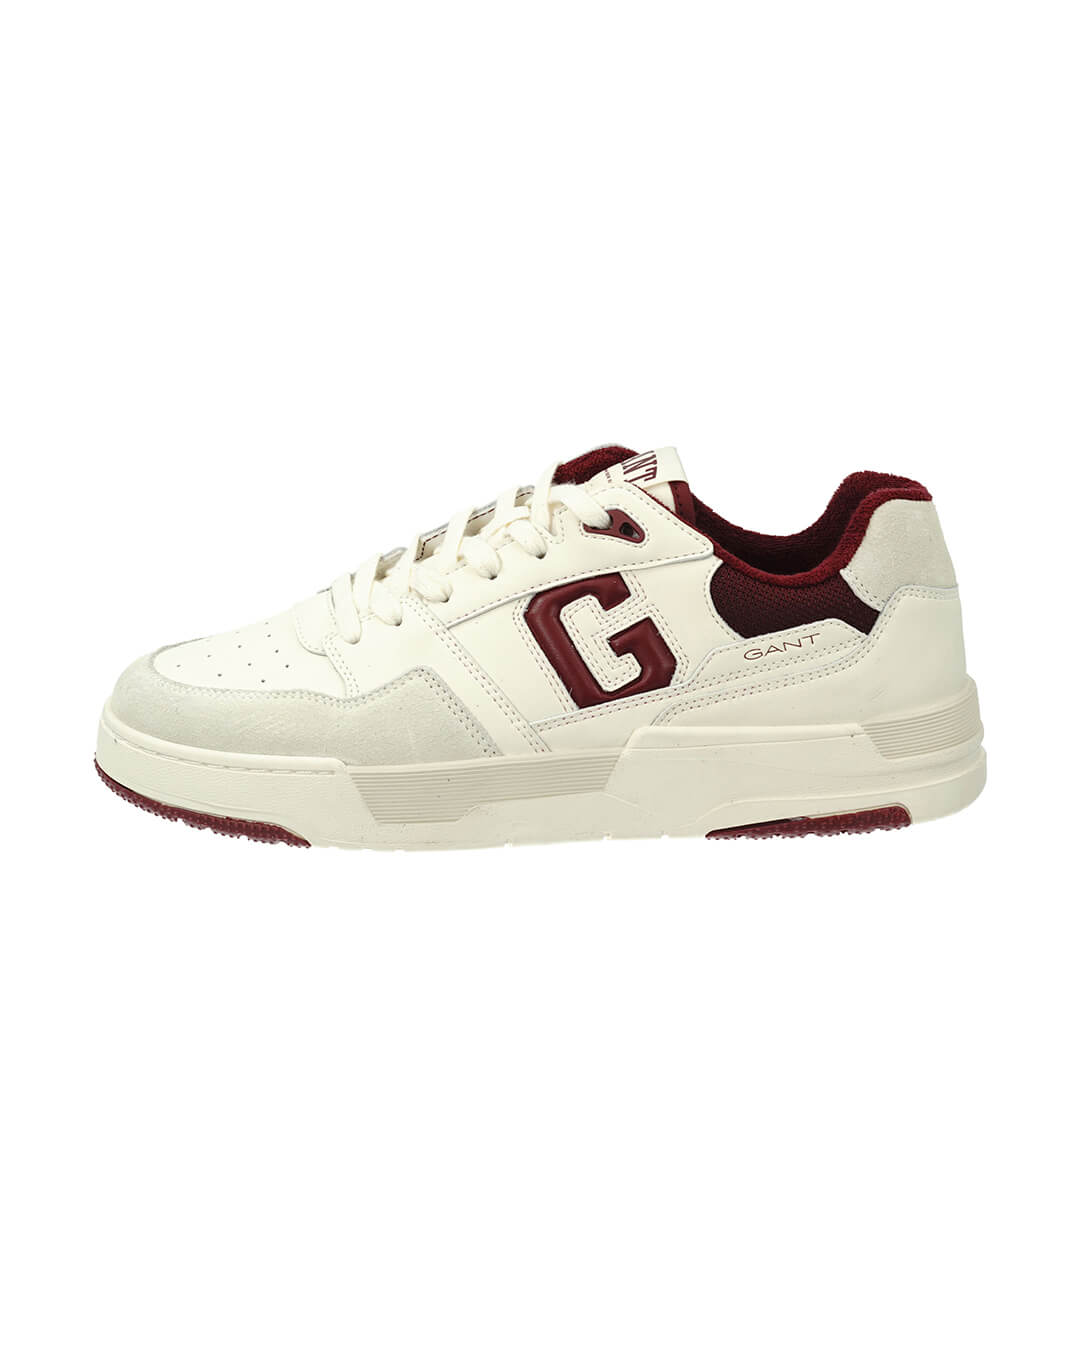 Gant Shoes Gant Off White And Red Brookpal Sneakers